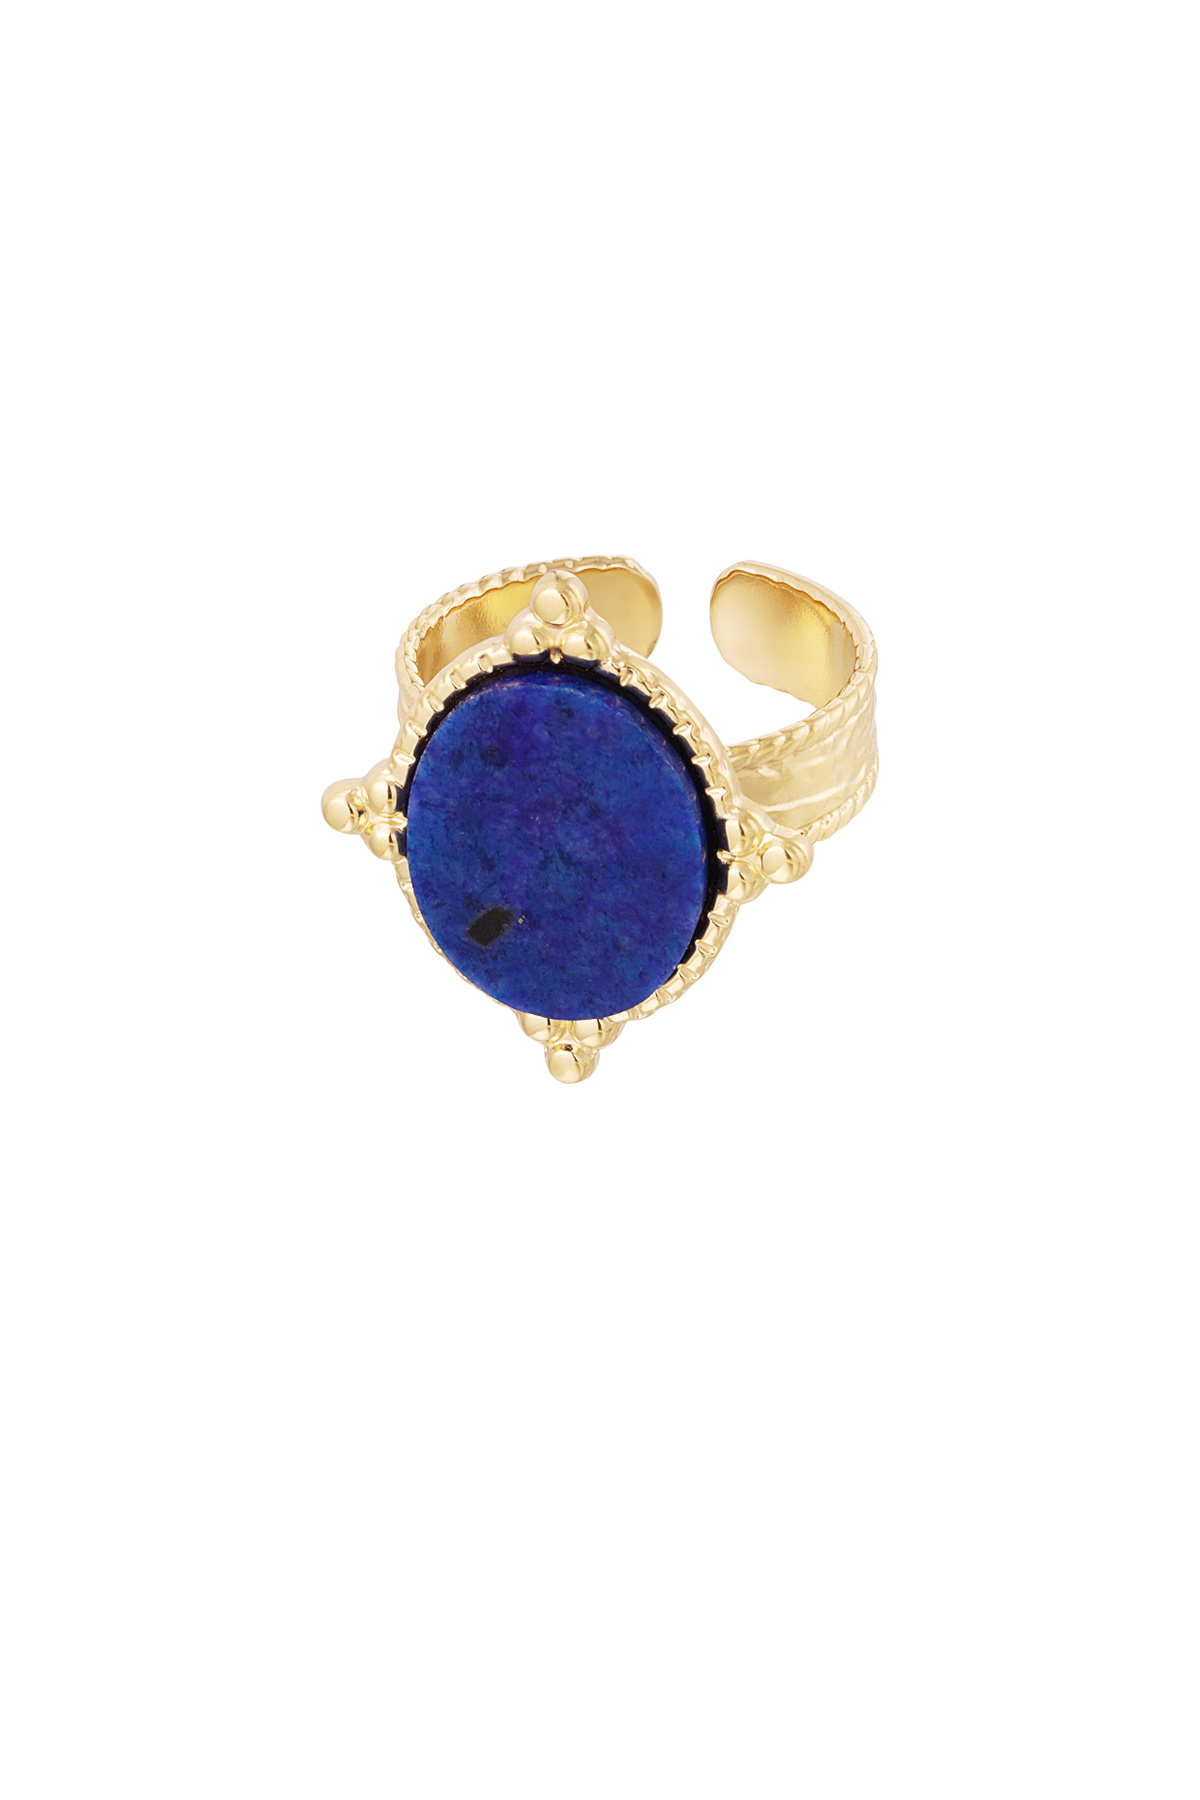 Ring stone with decoration - gold/blue h5 